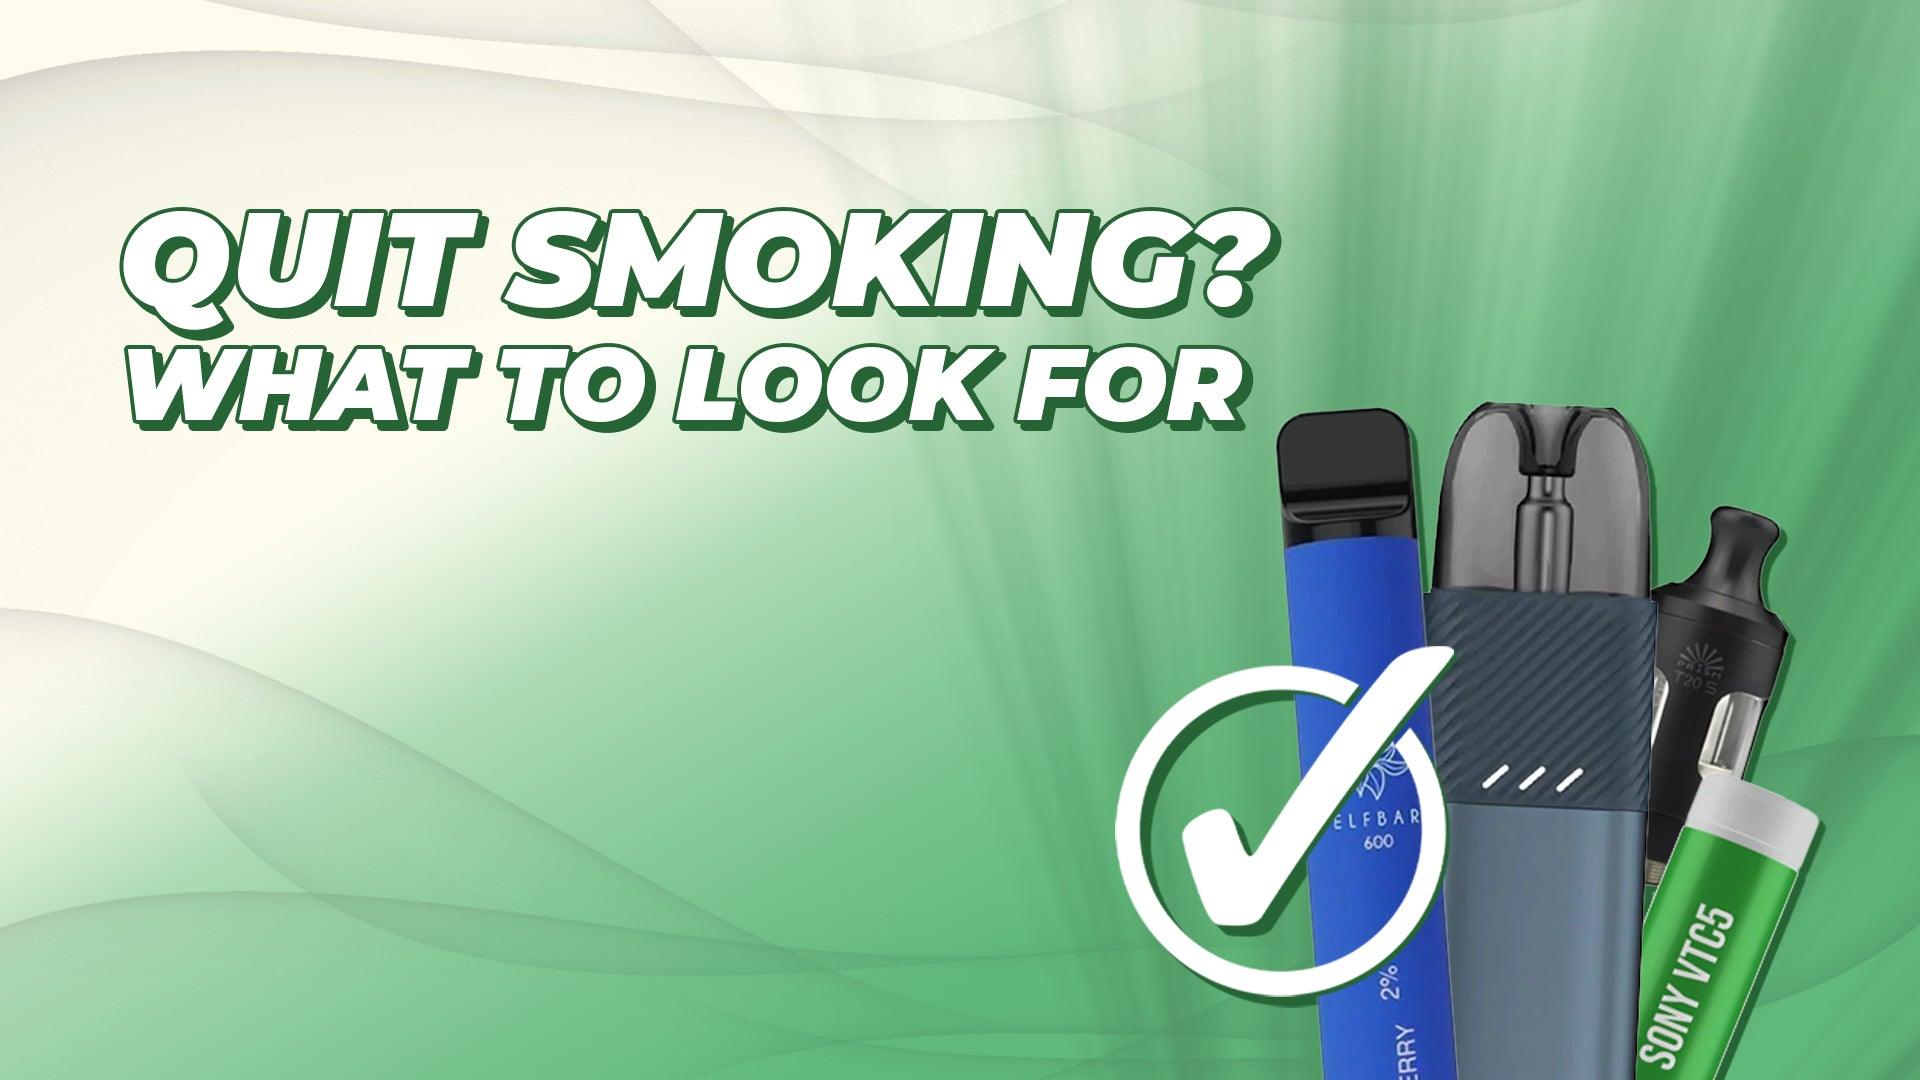 Quit Smoking? What to Look For Before Buying a Vape - Category:E-Liquids, Category:Vape Kits, Category:Vaping, Sub Category:Quit Smoking, Sub Category:Vaping Style